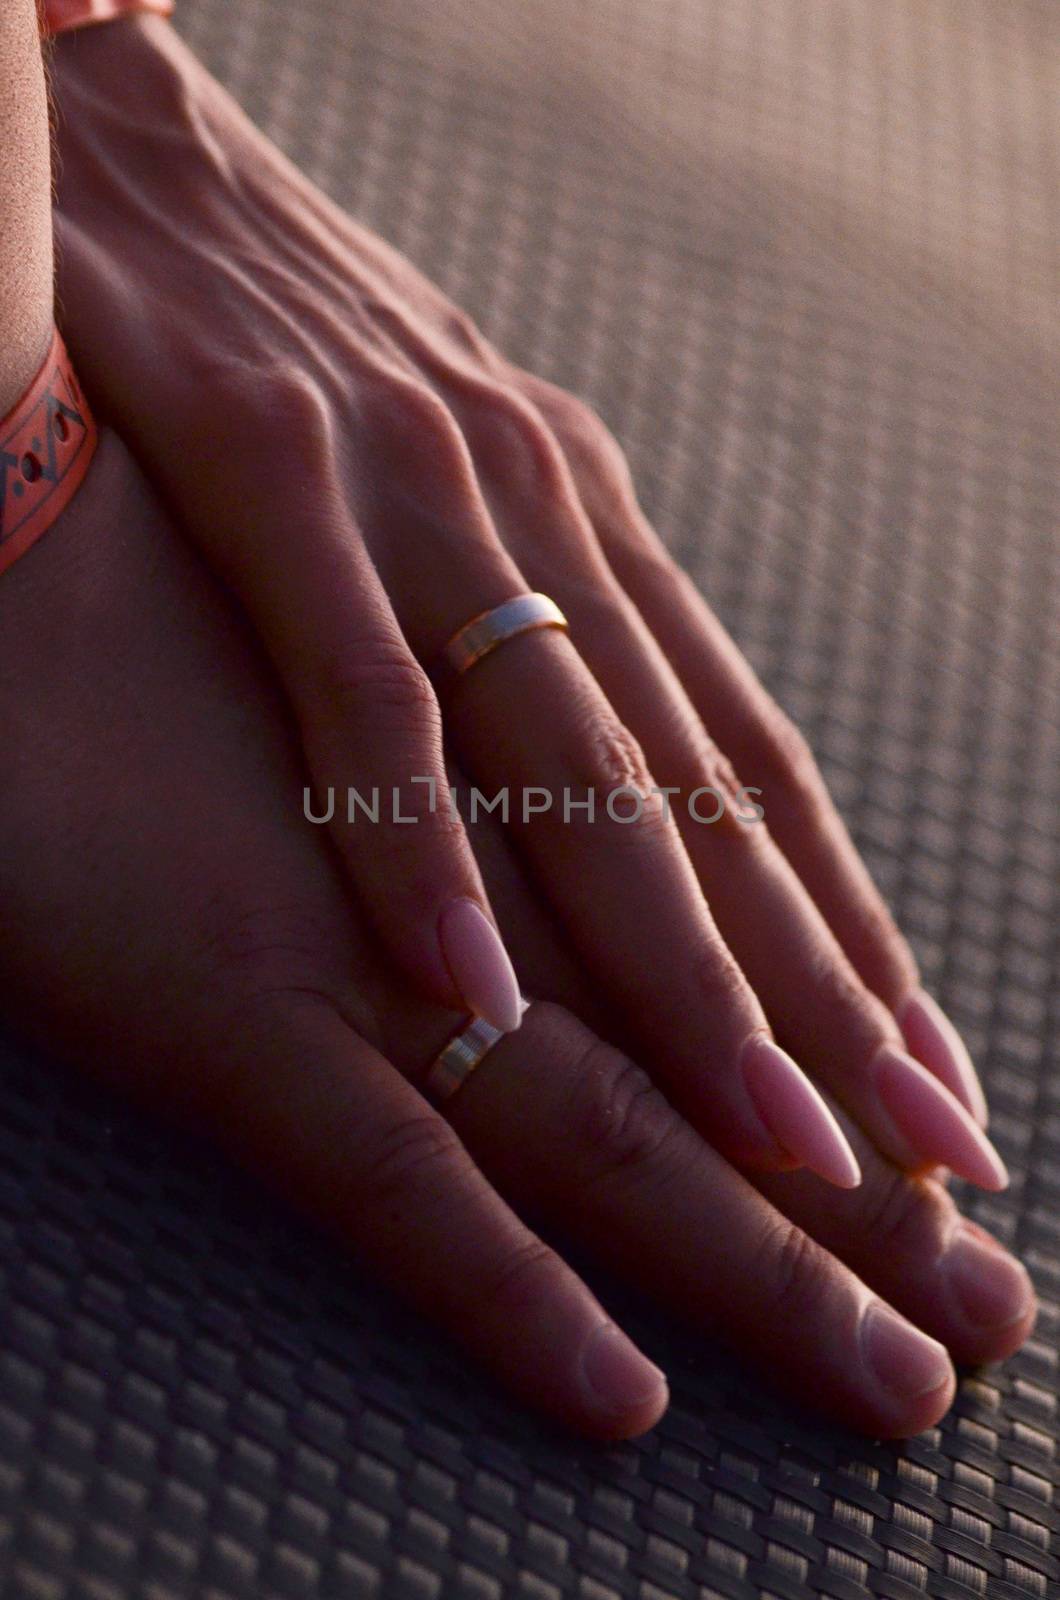 Newlyweds hands with wedding rings on the finger clasped together